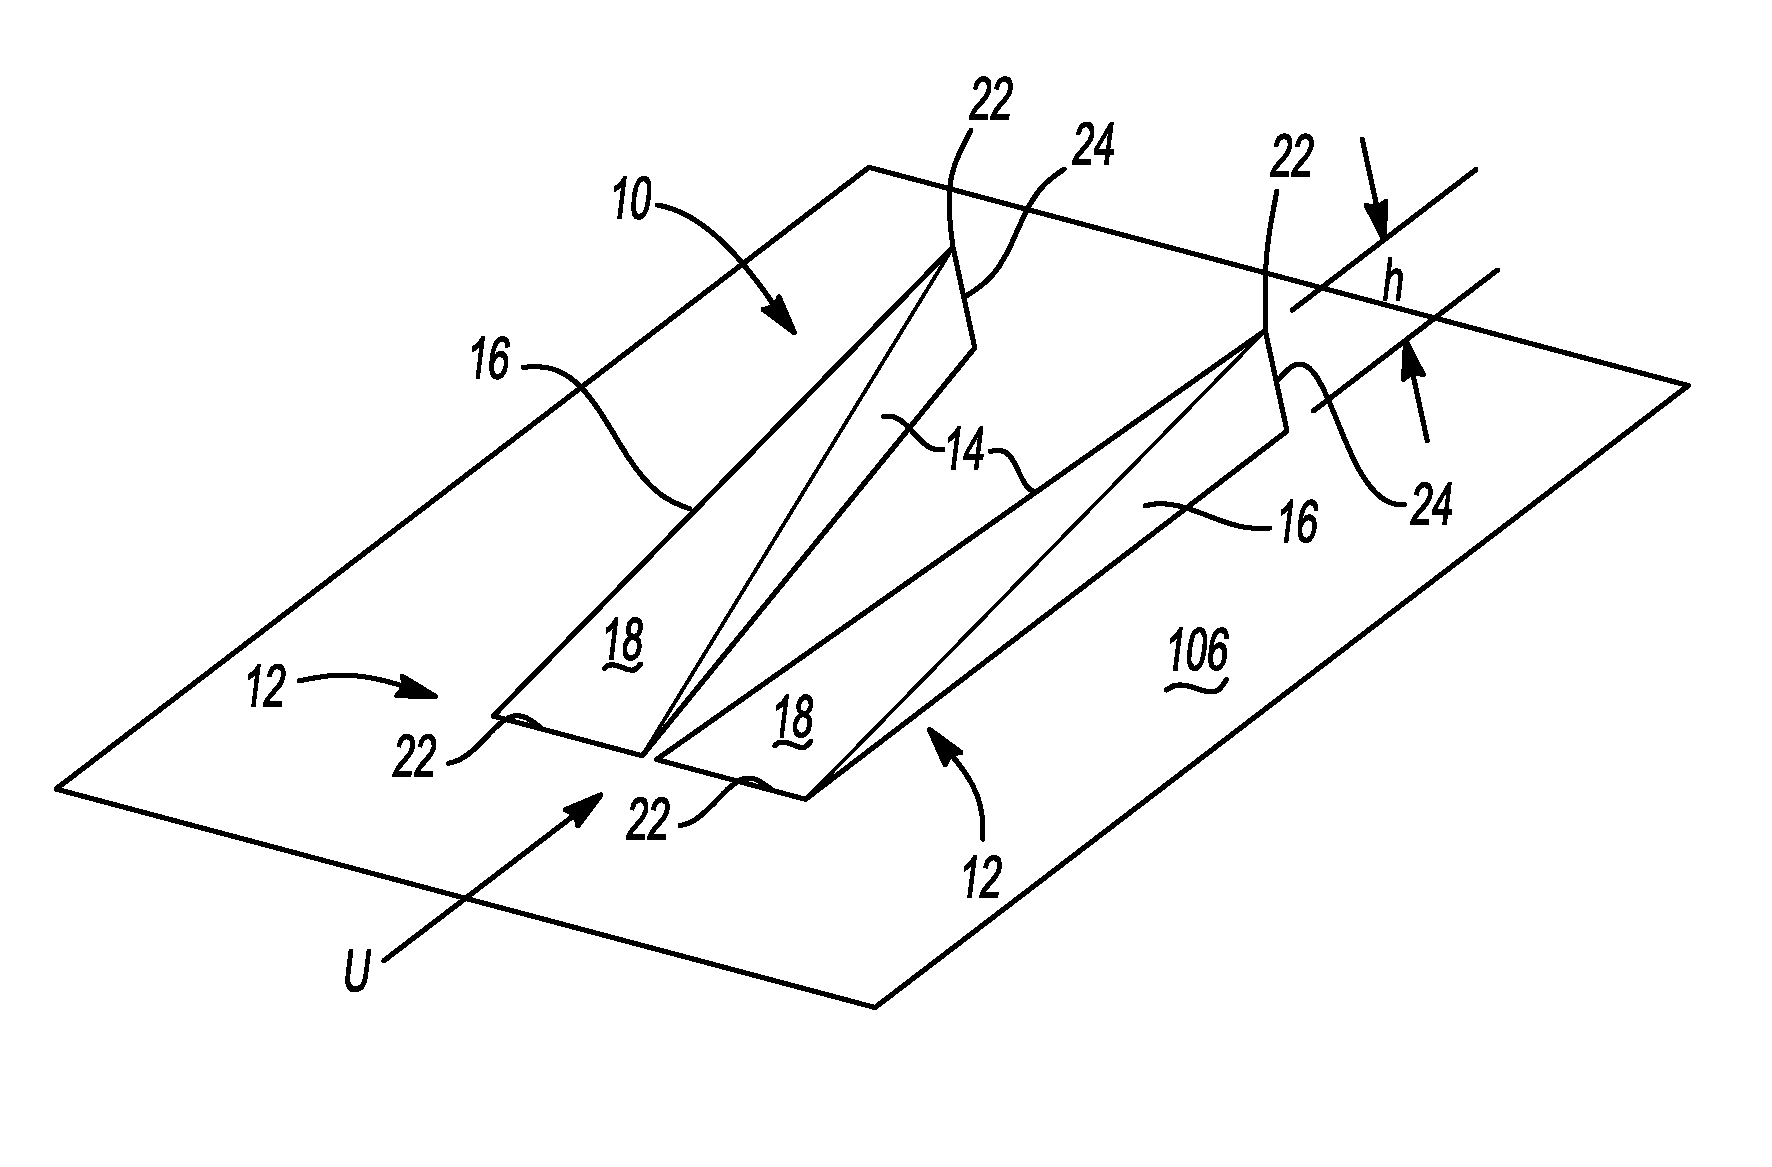 Passive boundary layer control elements